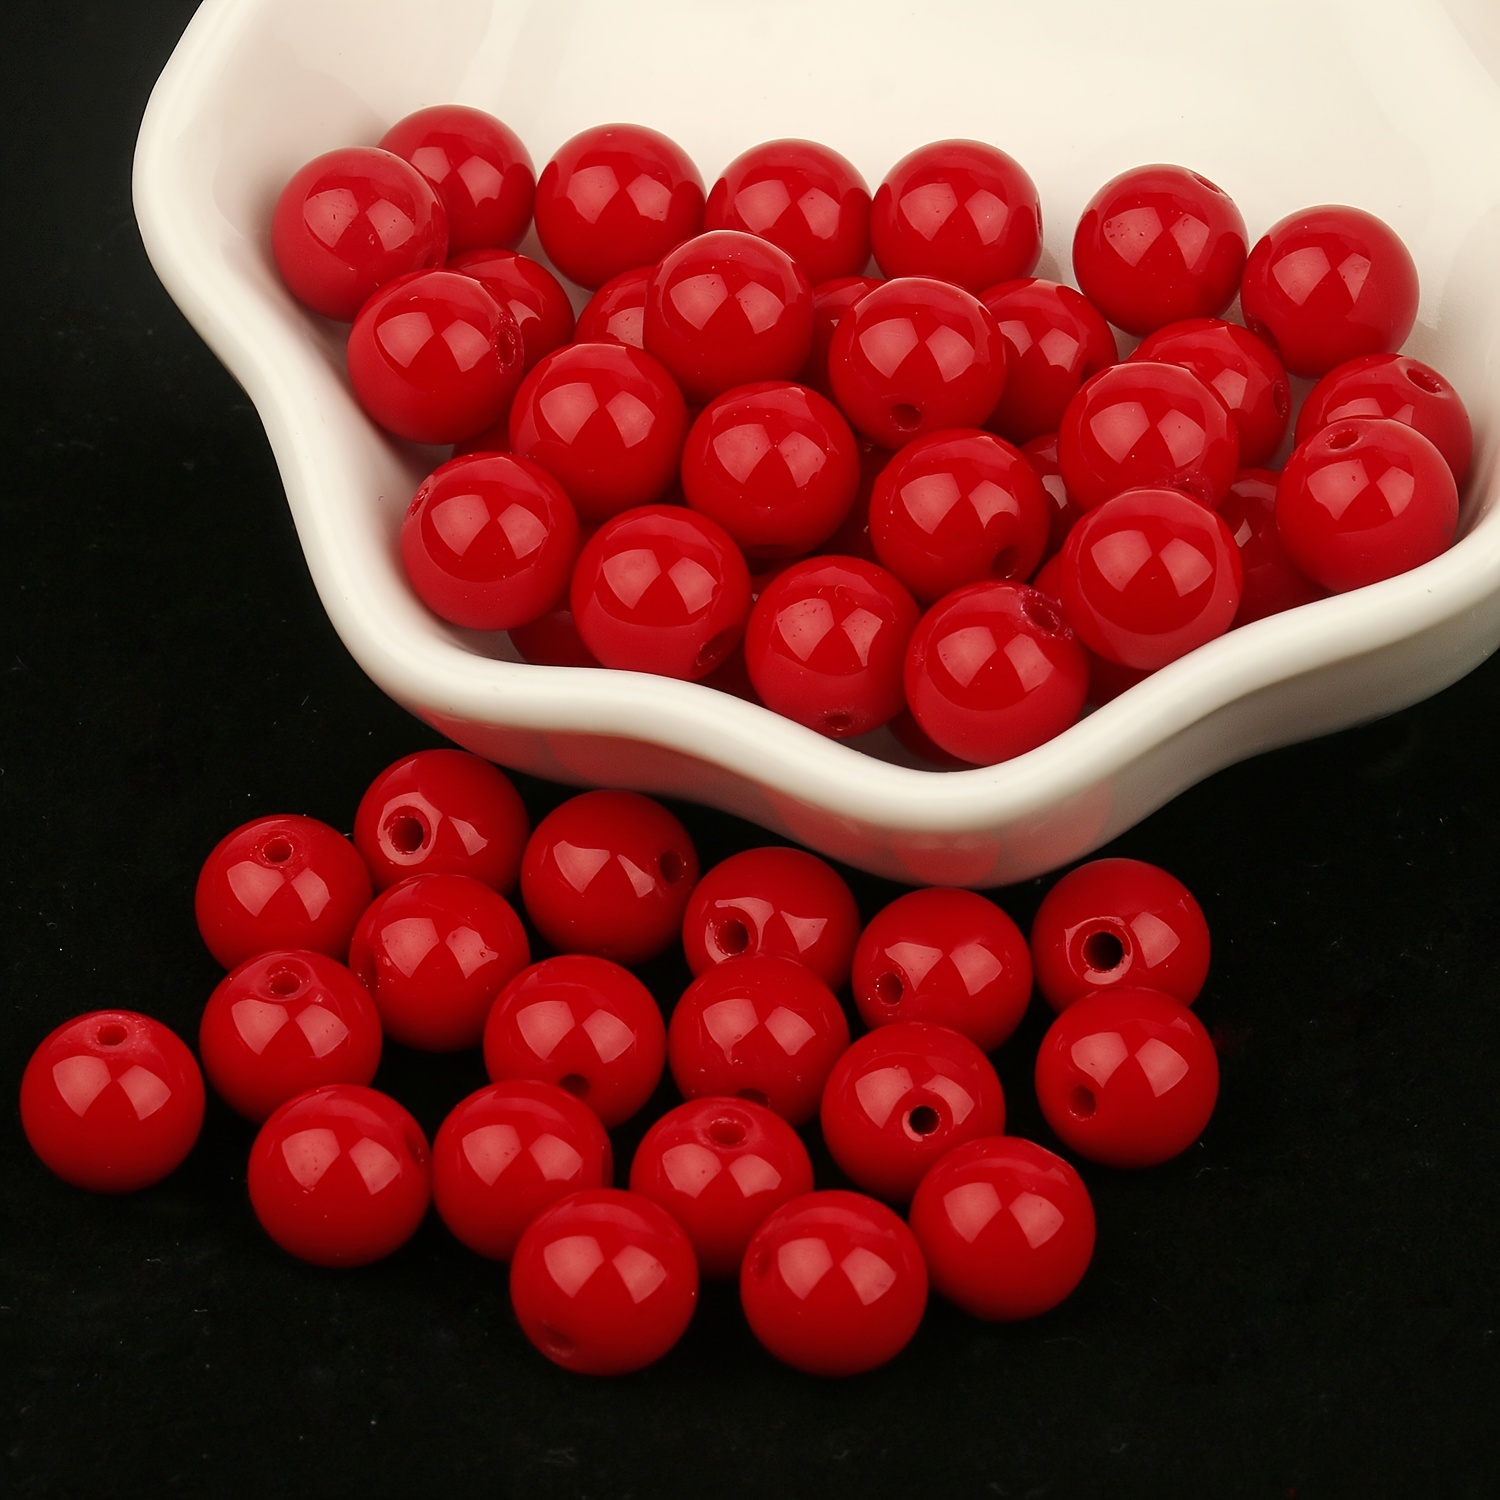 KJIHENSA 1 Pc Natural Red Coral Beads Round Loose Spacer Stone Beads for  Jewelry Making Bracelet Accessories 4 6 8 10 12mm-coral,9mm : :  Home & Kitchen